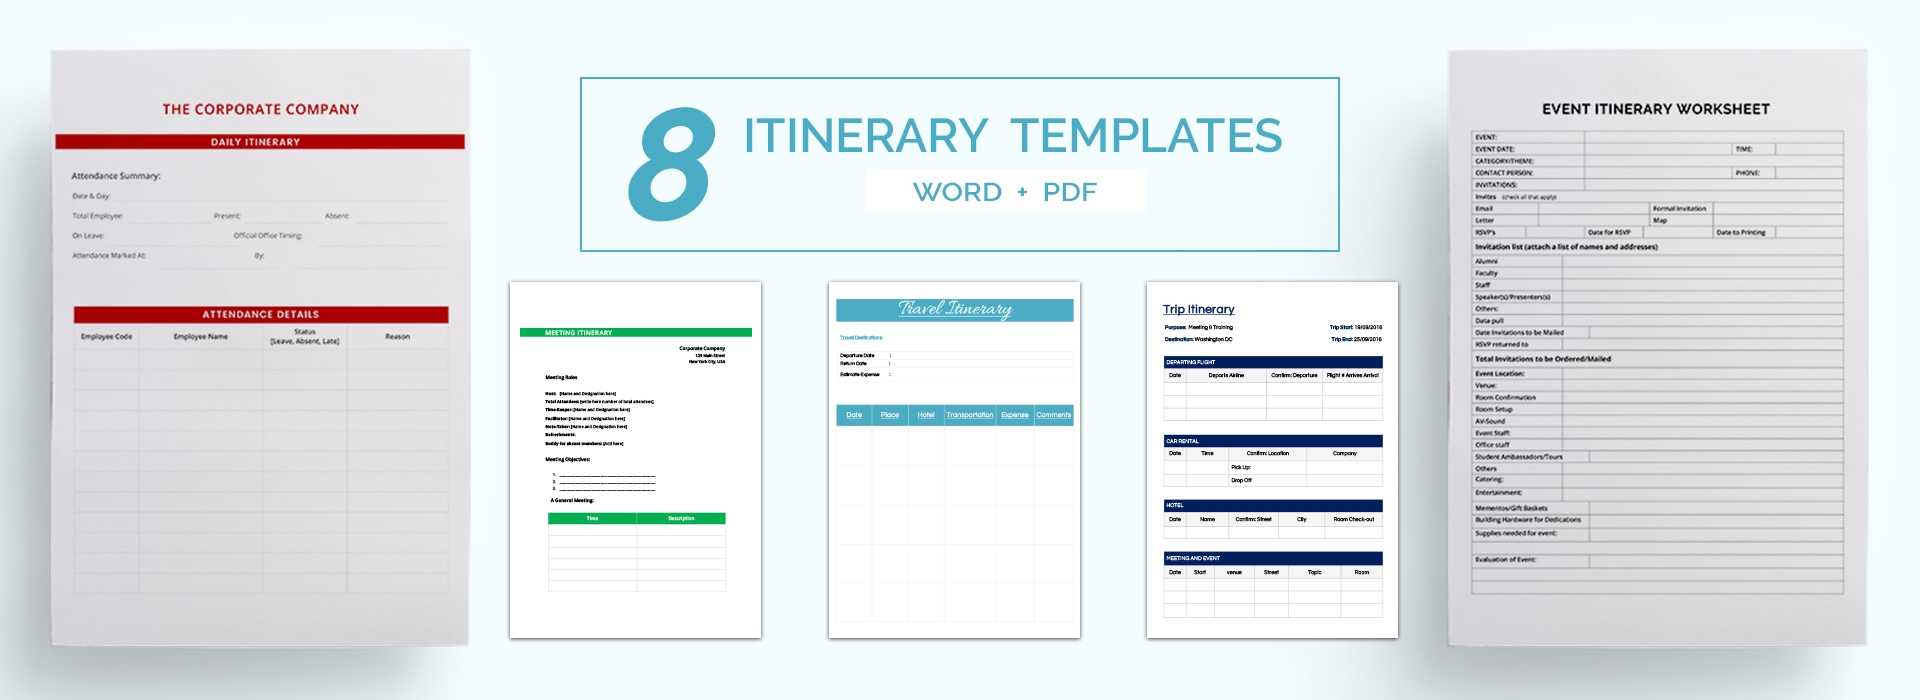 16+ Free Itinerary Templates – Travel, Wedding, Vacation Throughout Blank Trip Itinerary Template